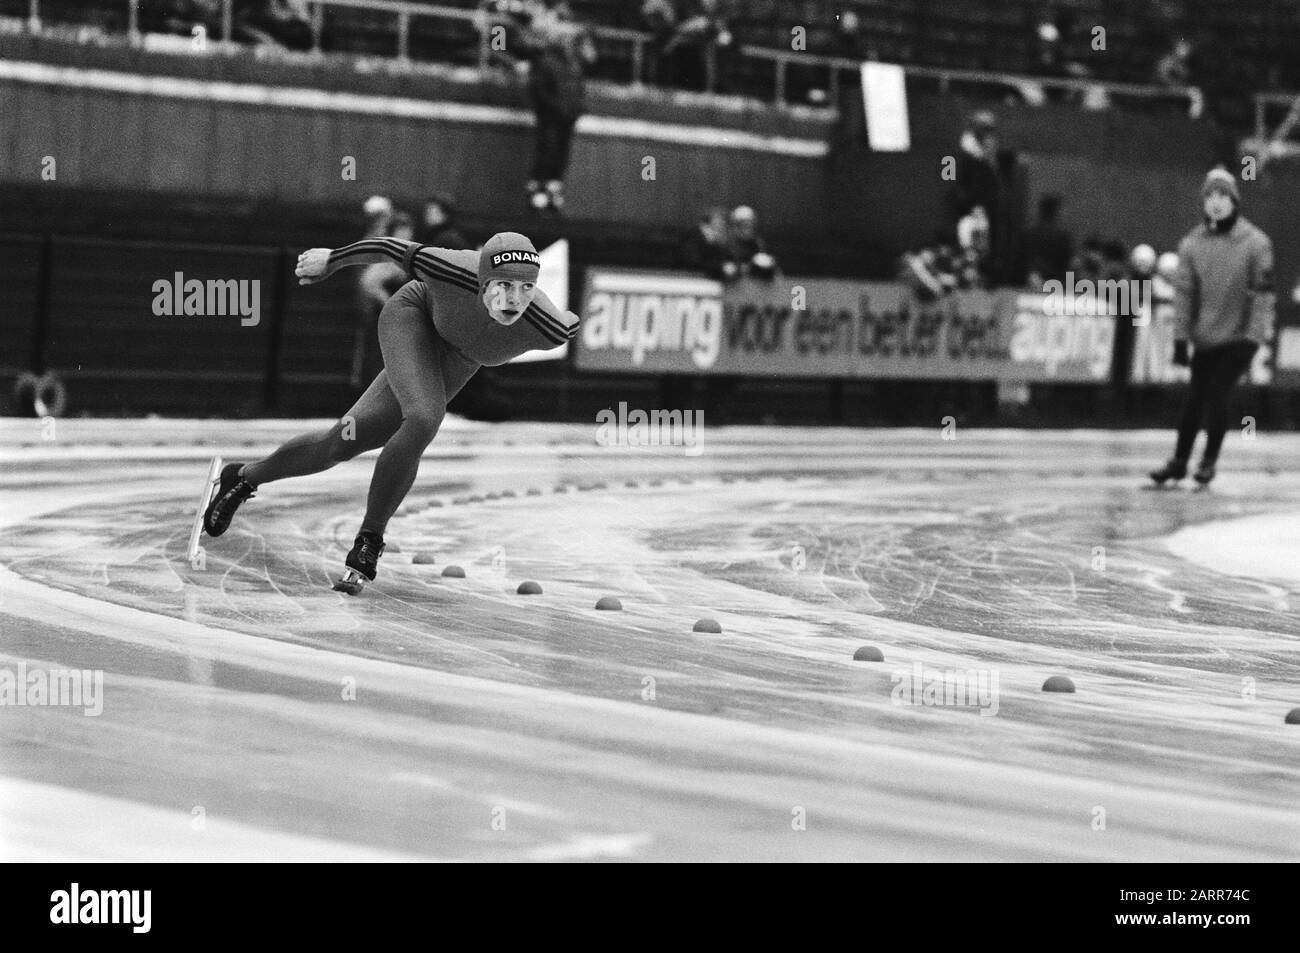 Dutch championships all-round women in Deventer  Ria Visser in action at the 1500 meters Date: 9 January 1983 Location: Deventer, Overijssel Keywords: skating, skating competitions, sport Personal name: Fisherman, Ria Stock Photo